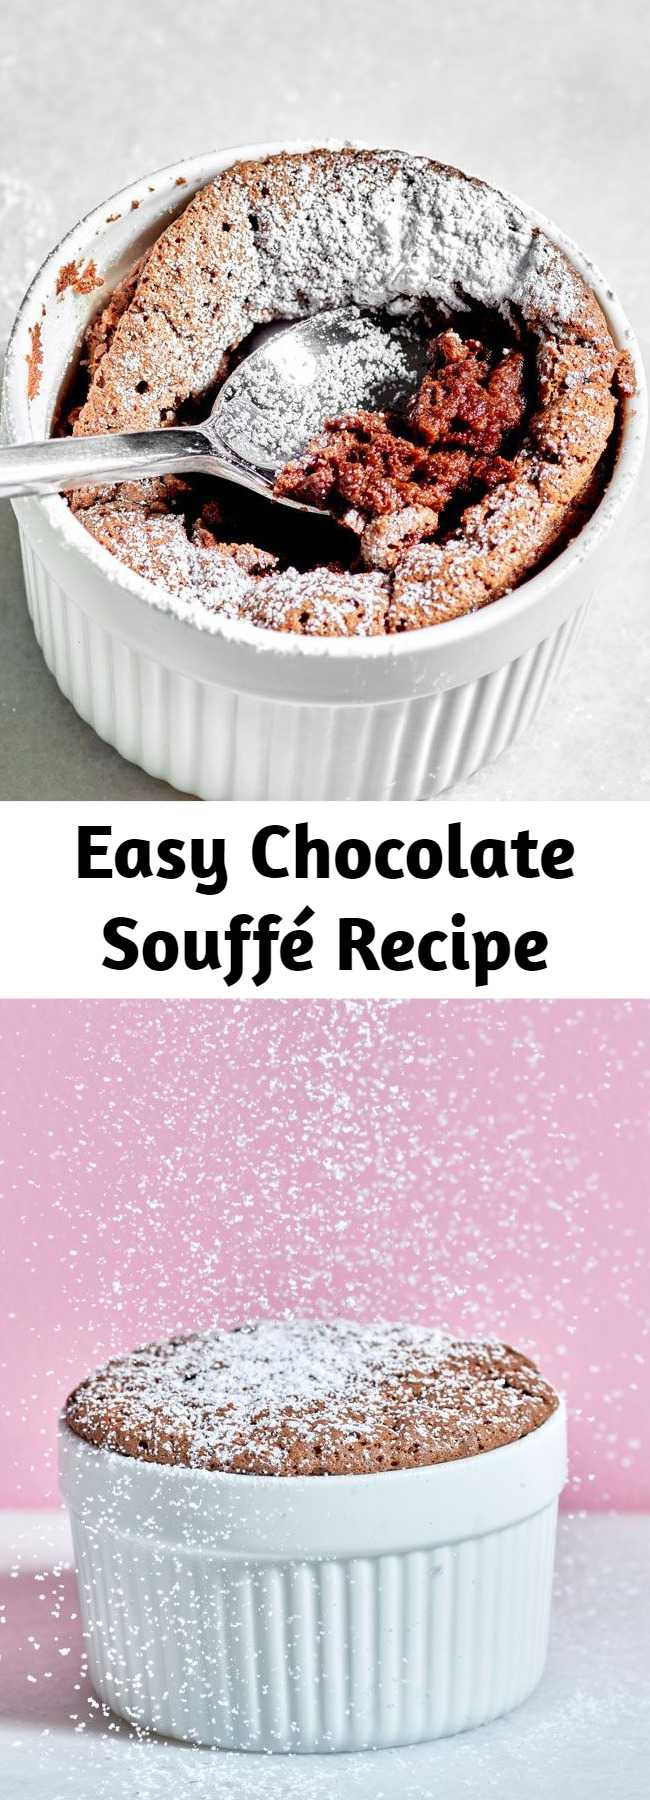 Easy Chocolate Souffé Recipe - Chocolate Souffé is an impressive look dessert with a warm molten center and this one is a guarantee success.